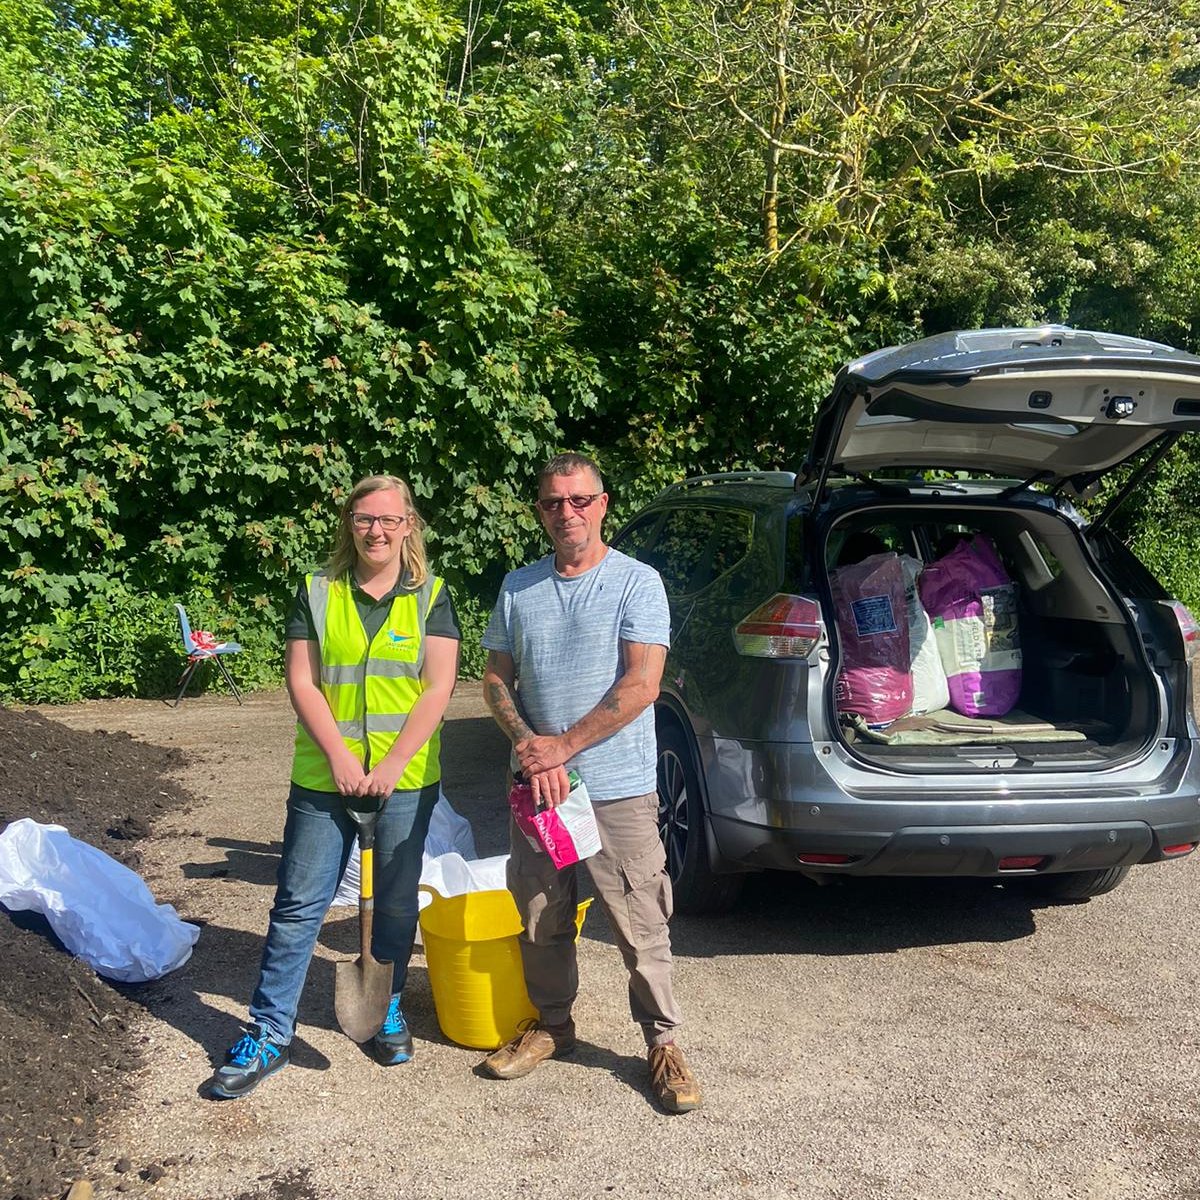 Our ‘Shovel It Yourself’ event is underway in the car park at the Grove in Felixstowe - here's Mark, our first customer who has already bagged up some compost for his garden. Please come along to collect some free compost before 2pm, and remember your shovel and a bag/container.